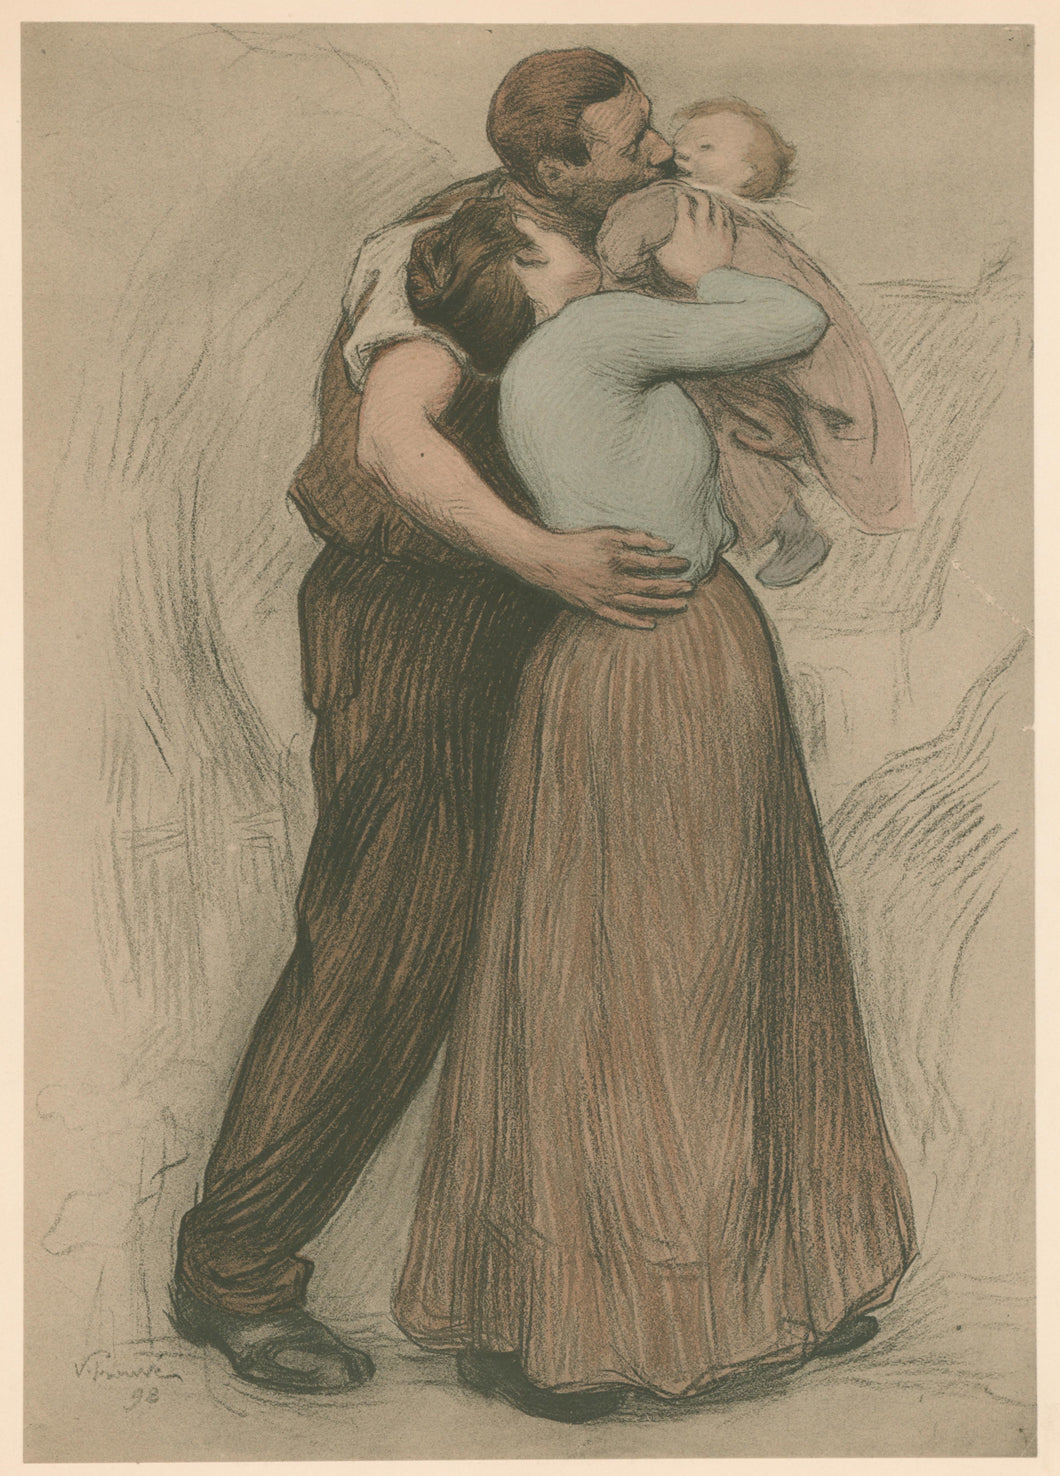 Prouve, Victor Emile  “The Kiss.”  From 